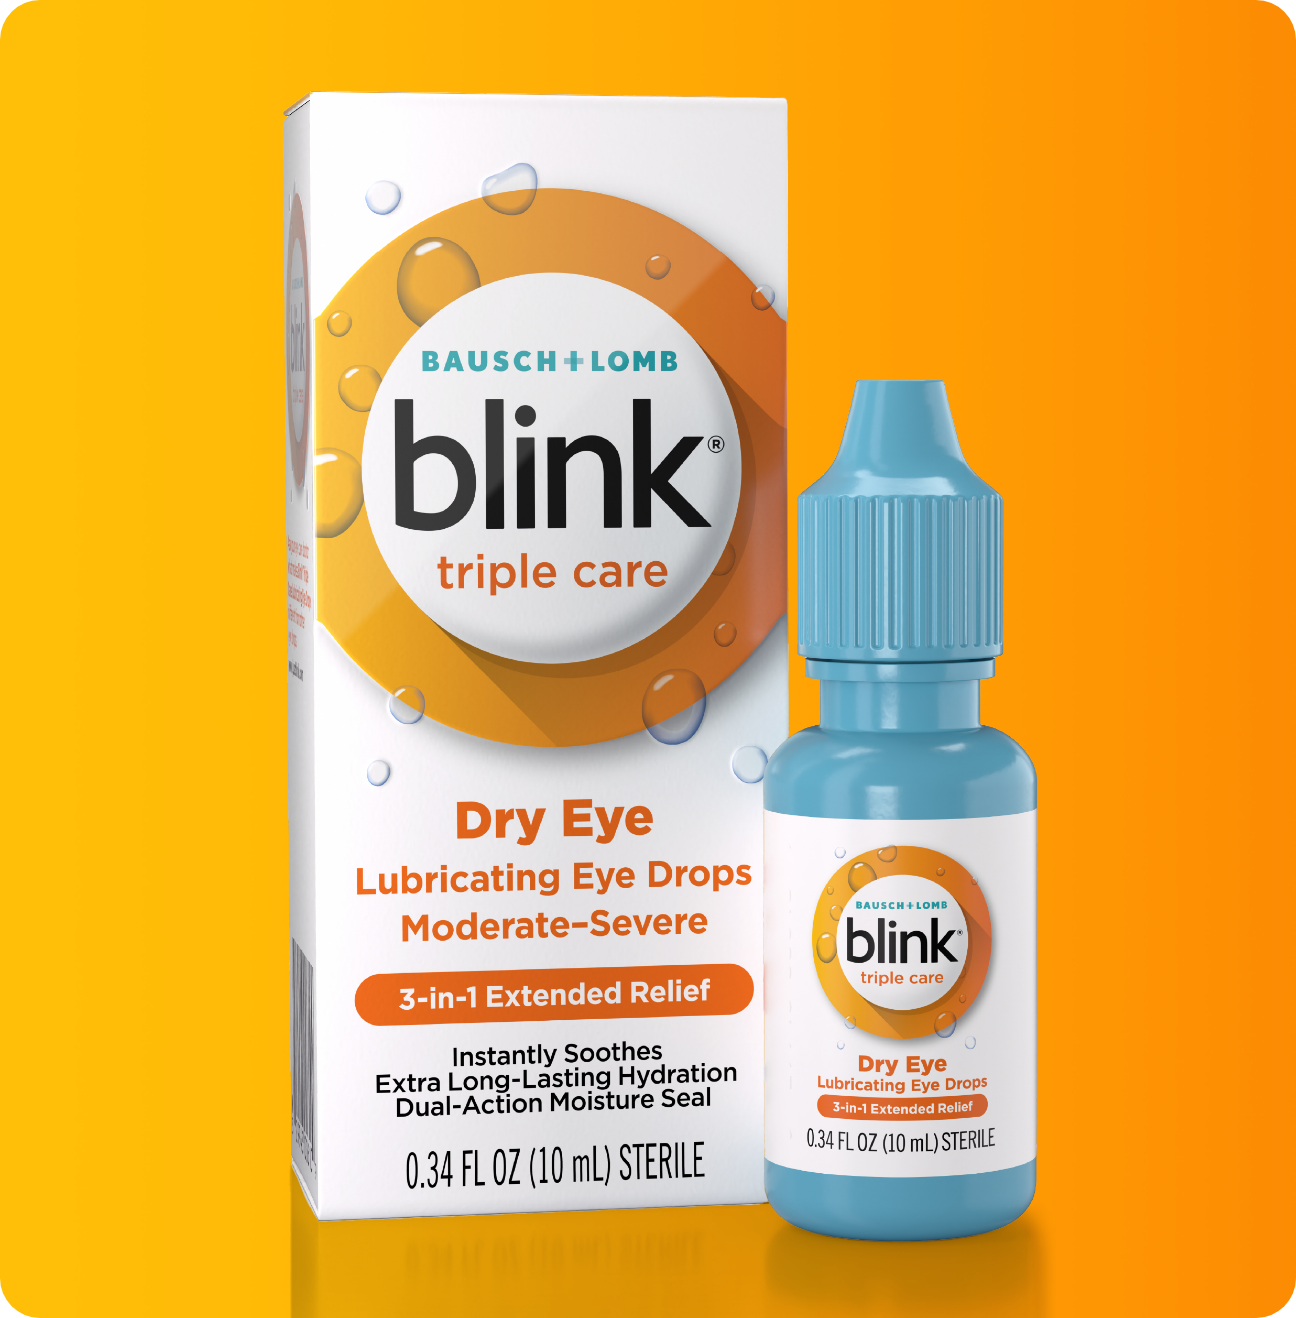 Blink Triple Care Lubricating Eye Drops bottle and carton 